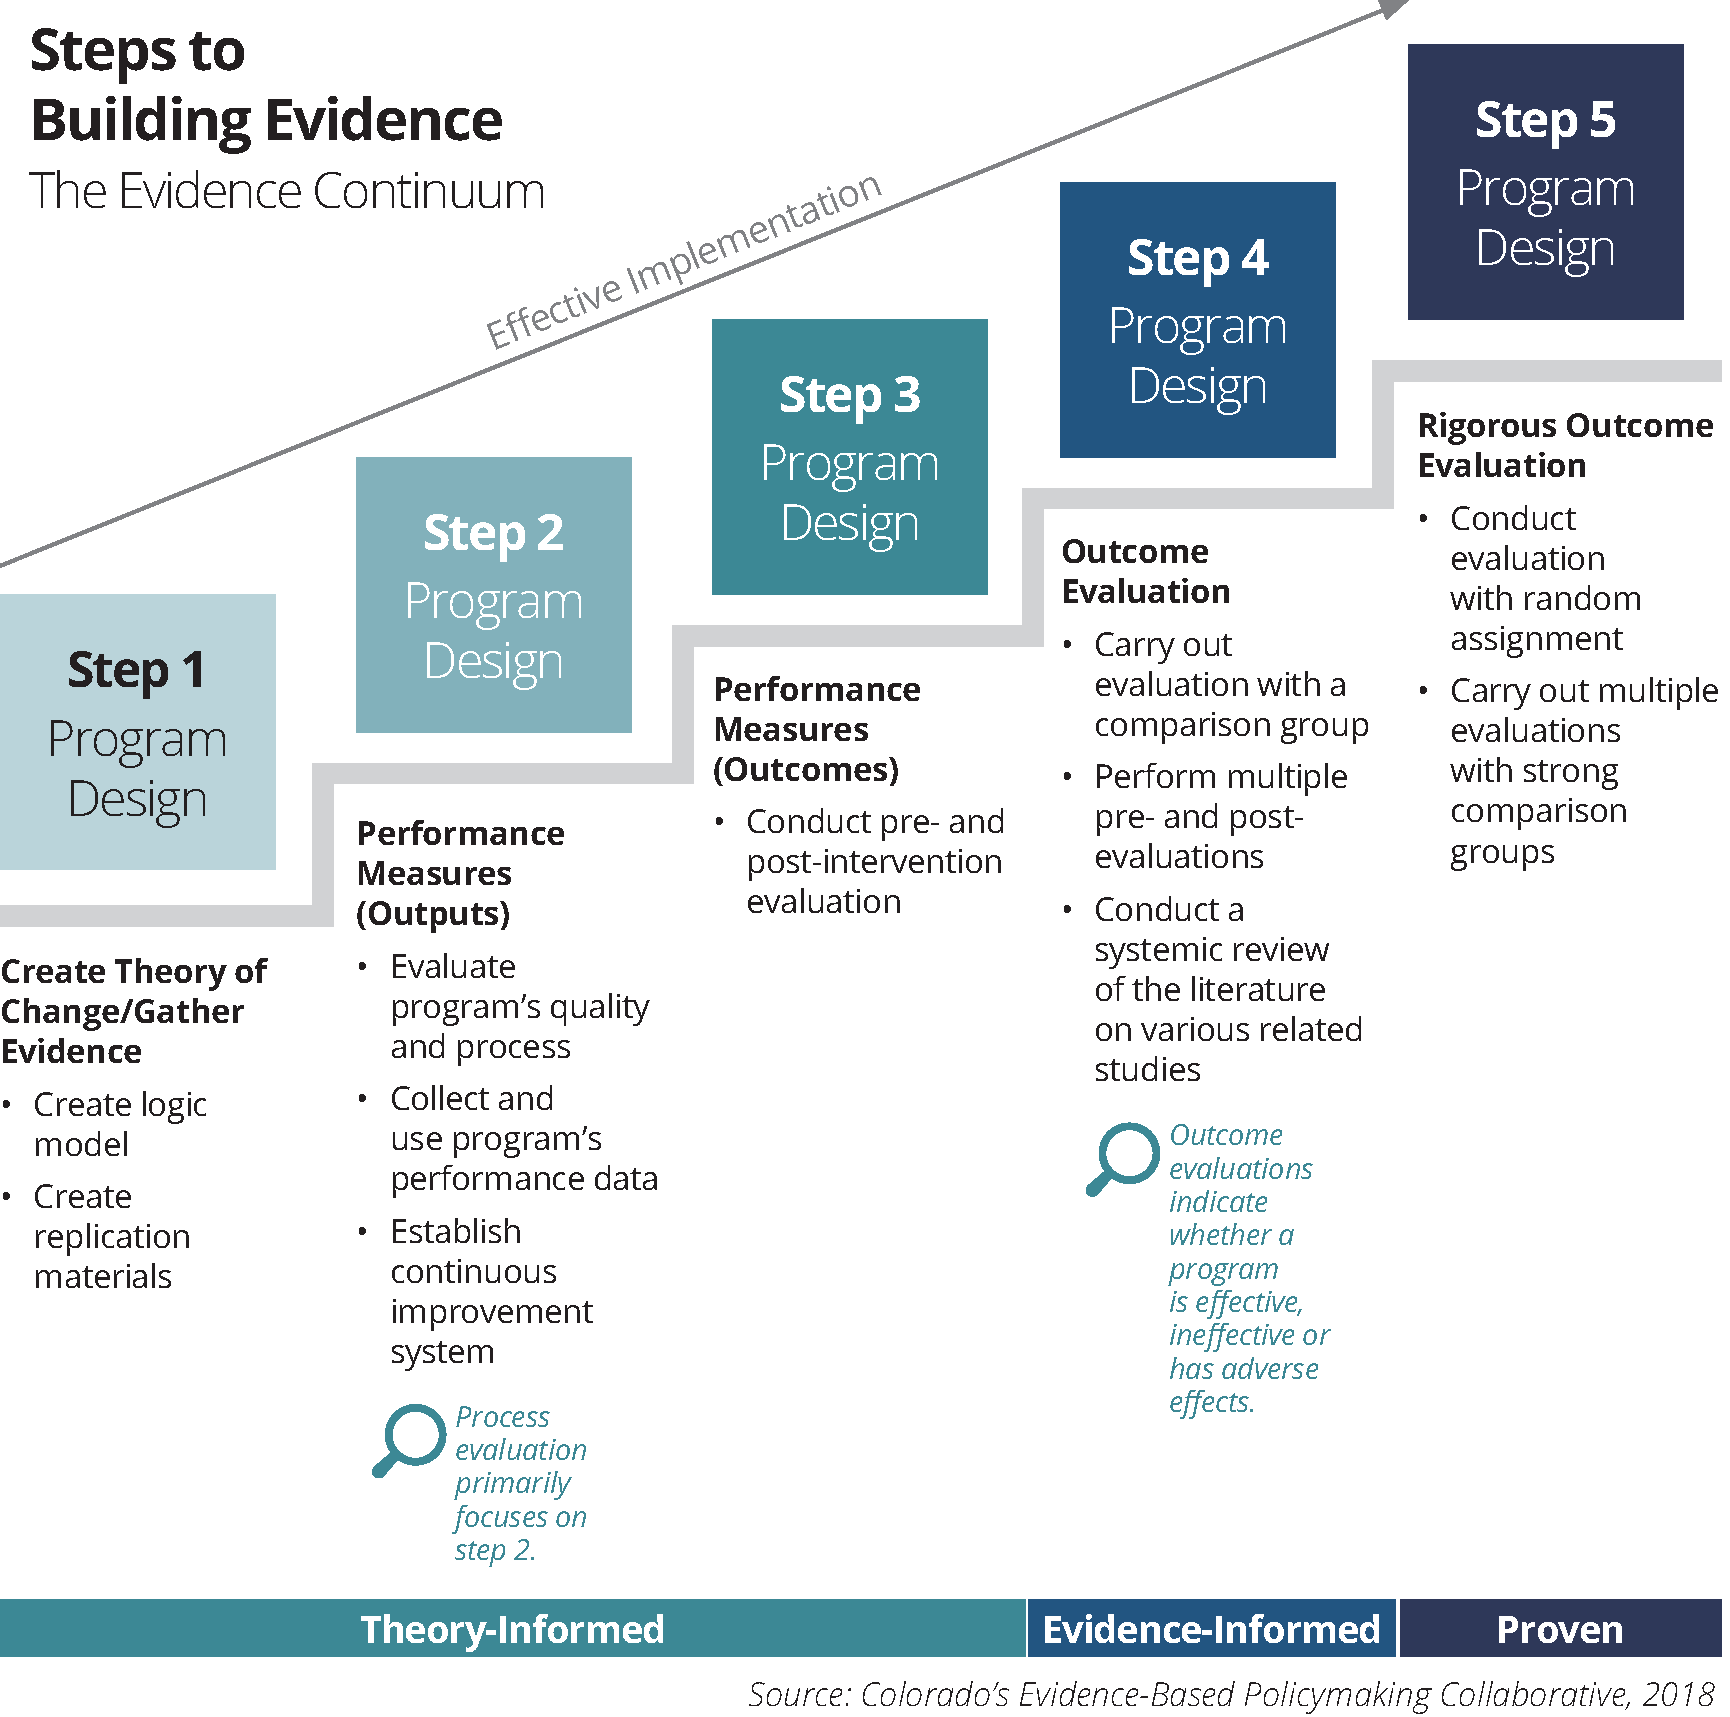 Steps to building evidence-based policy